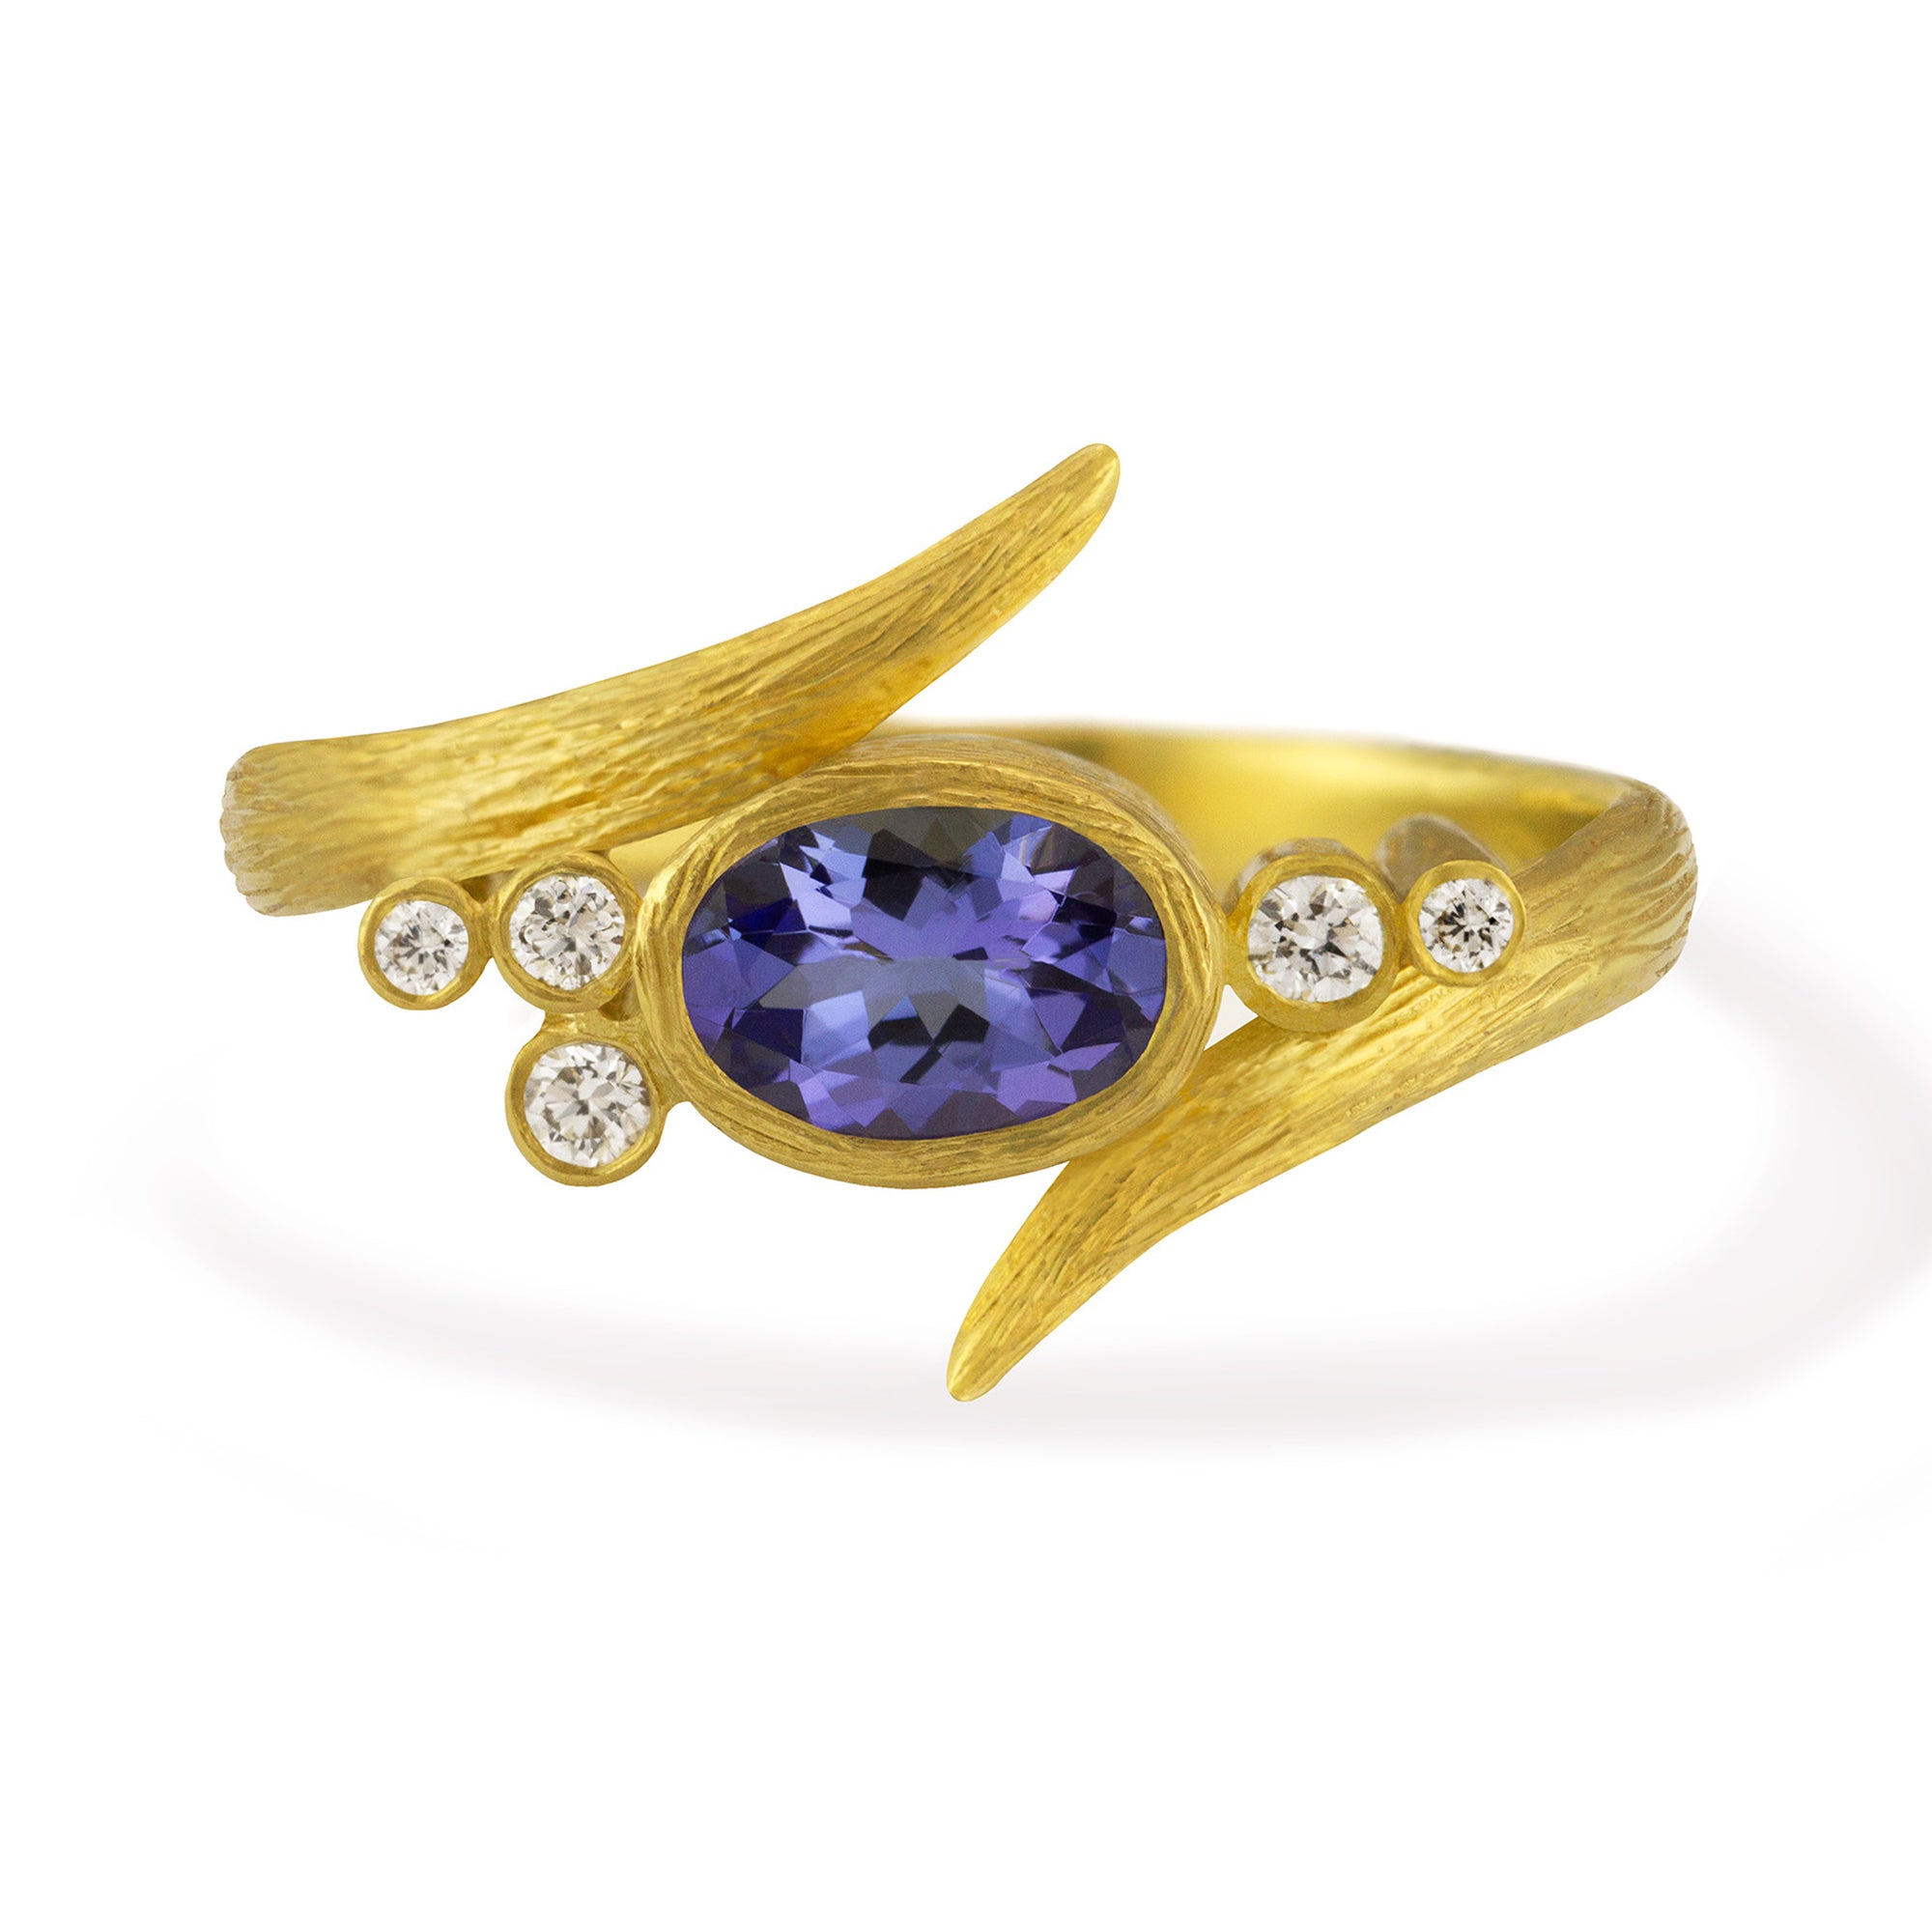 Tanzanite Vine Ring by Laurie Kaiser available at Talisman Collection Fine Jewelers in El Dorado Hills, CA and online. This Vine Ring features a sparkly oval-cut Tanzanite set on an 18k yellow gold band that delicately wraps around your finger. Accented with 0.08 cts of brilliant white diamonds, this petite ring really dazzles. The perfect bauble to make you smile every time you look at it.